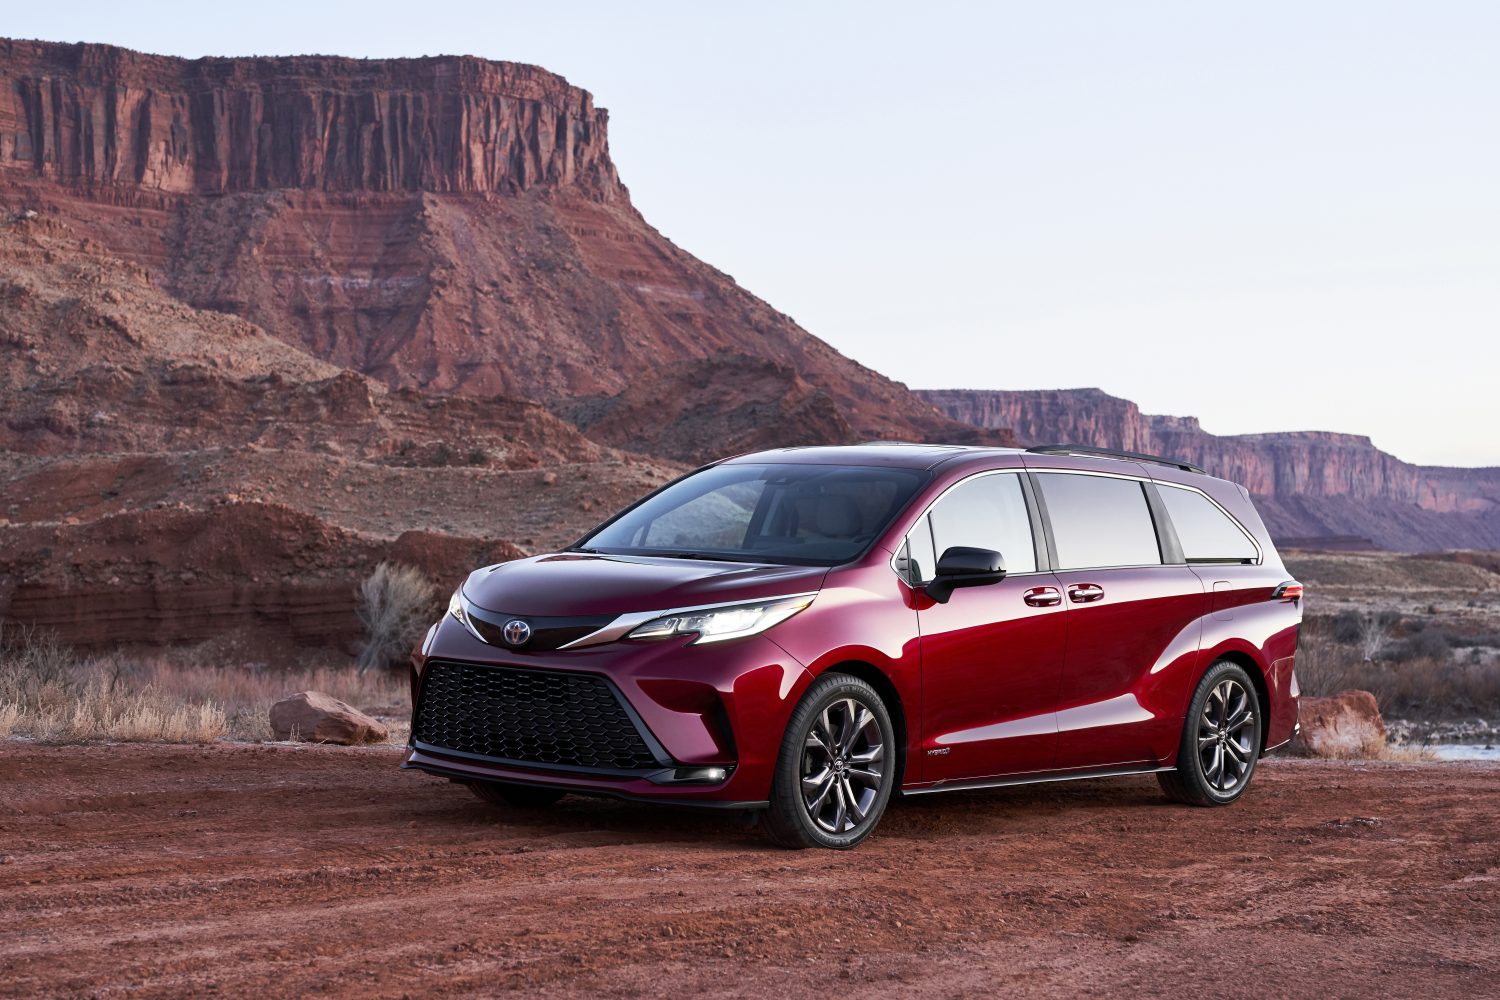 Toyota Launches All-New 2021 Sienna to Suit a Variety of Lifestyles - Toyota  USA Newsroom